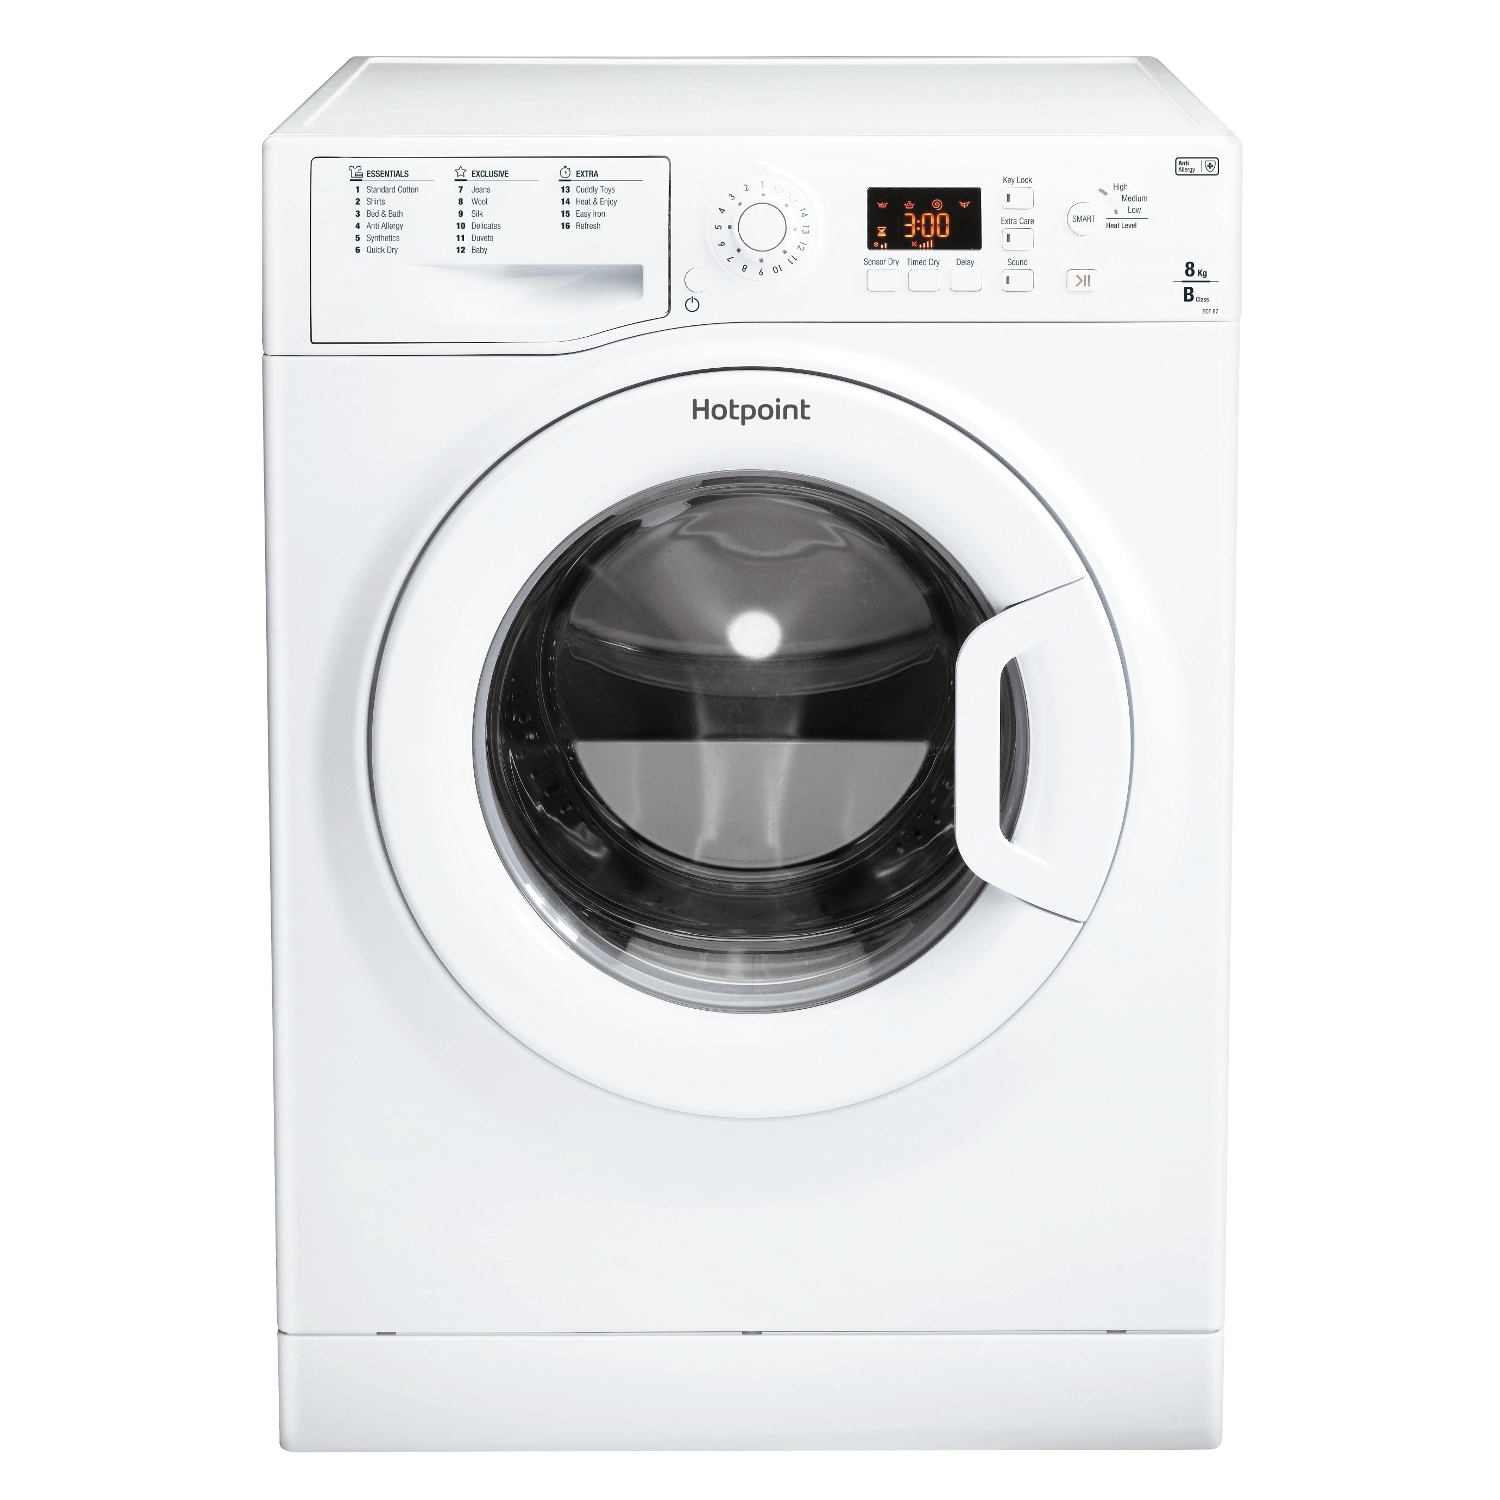 Hotpoint 8kg Condenser Tumble Dryer - White - B Rated - 1